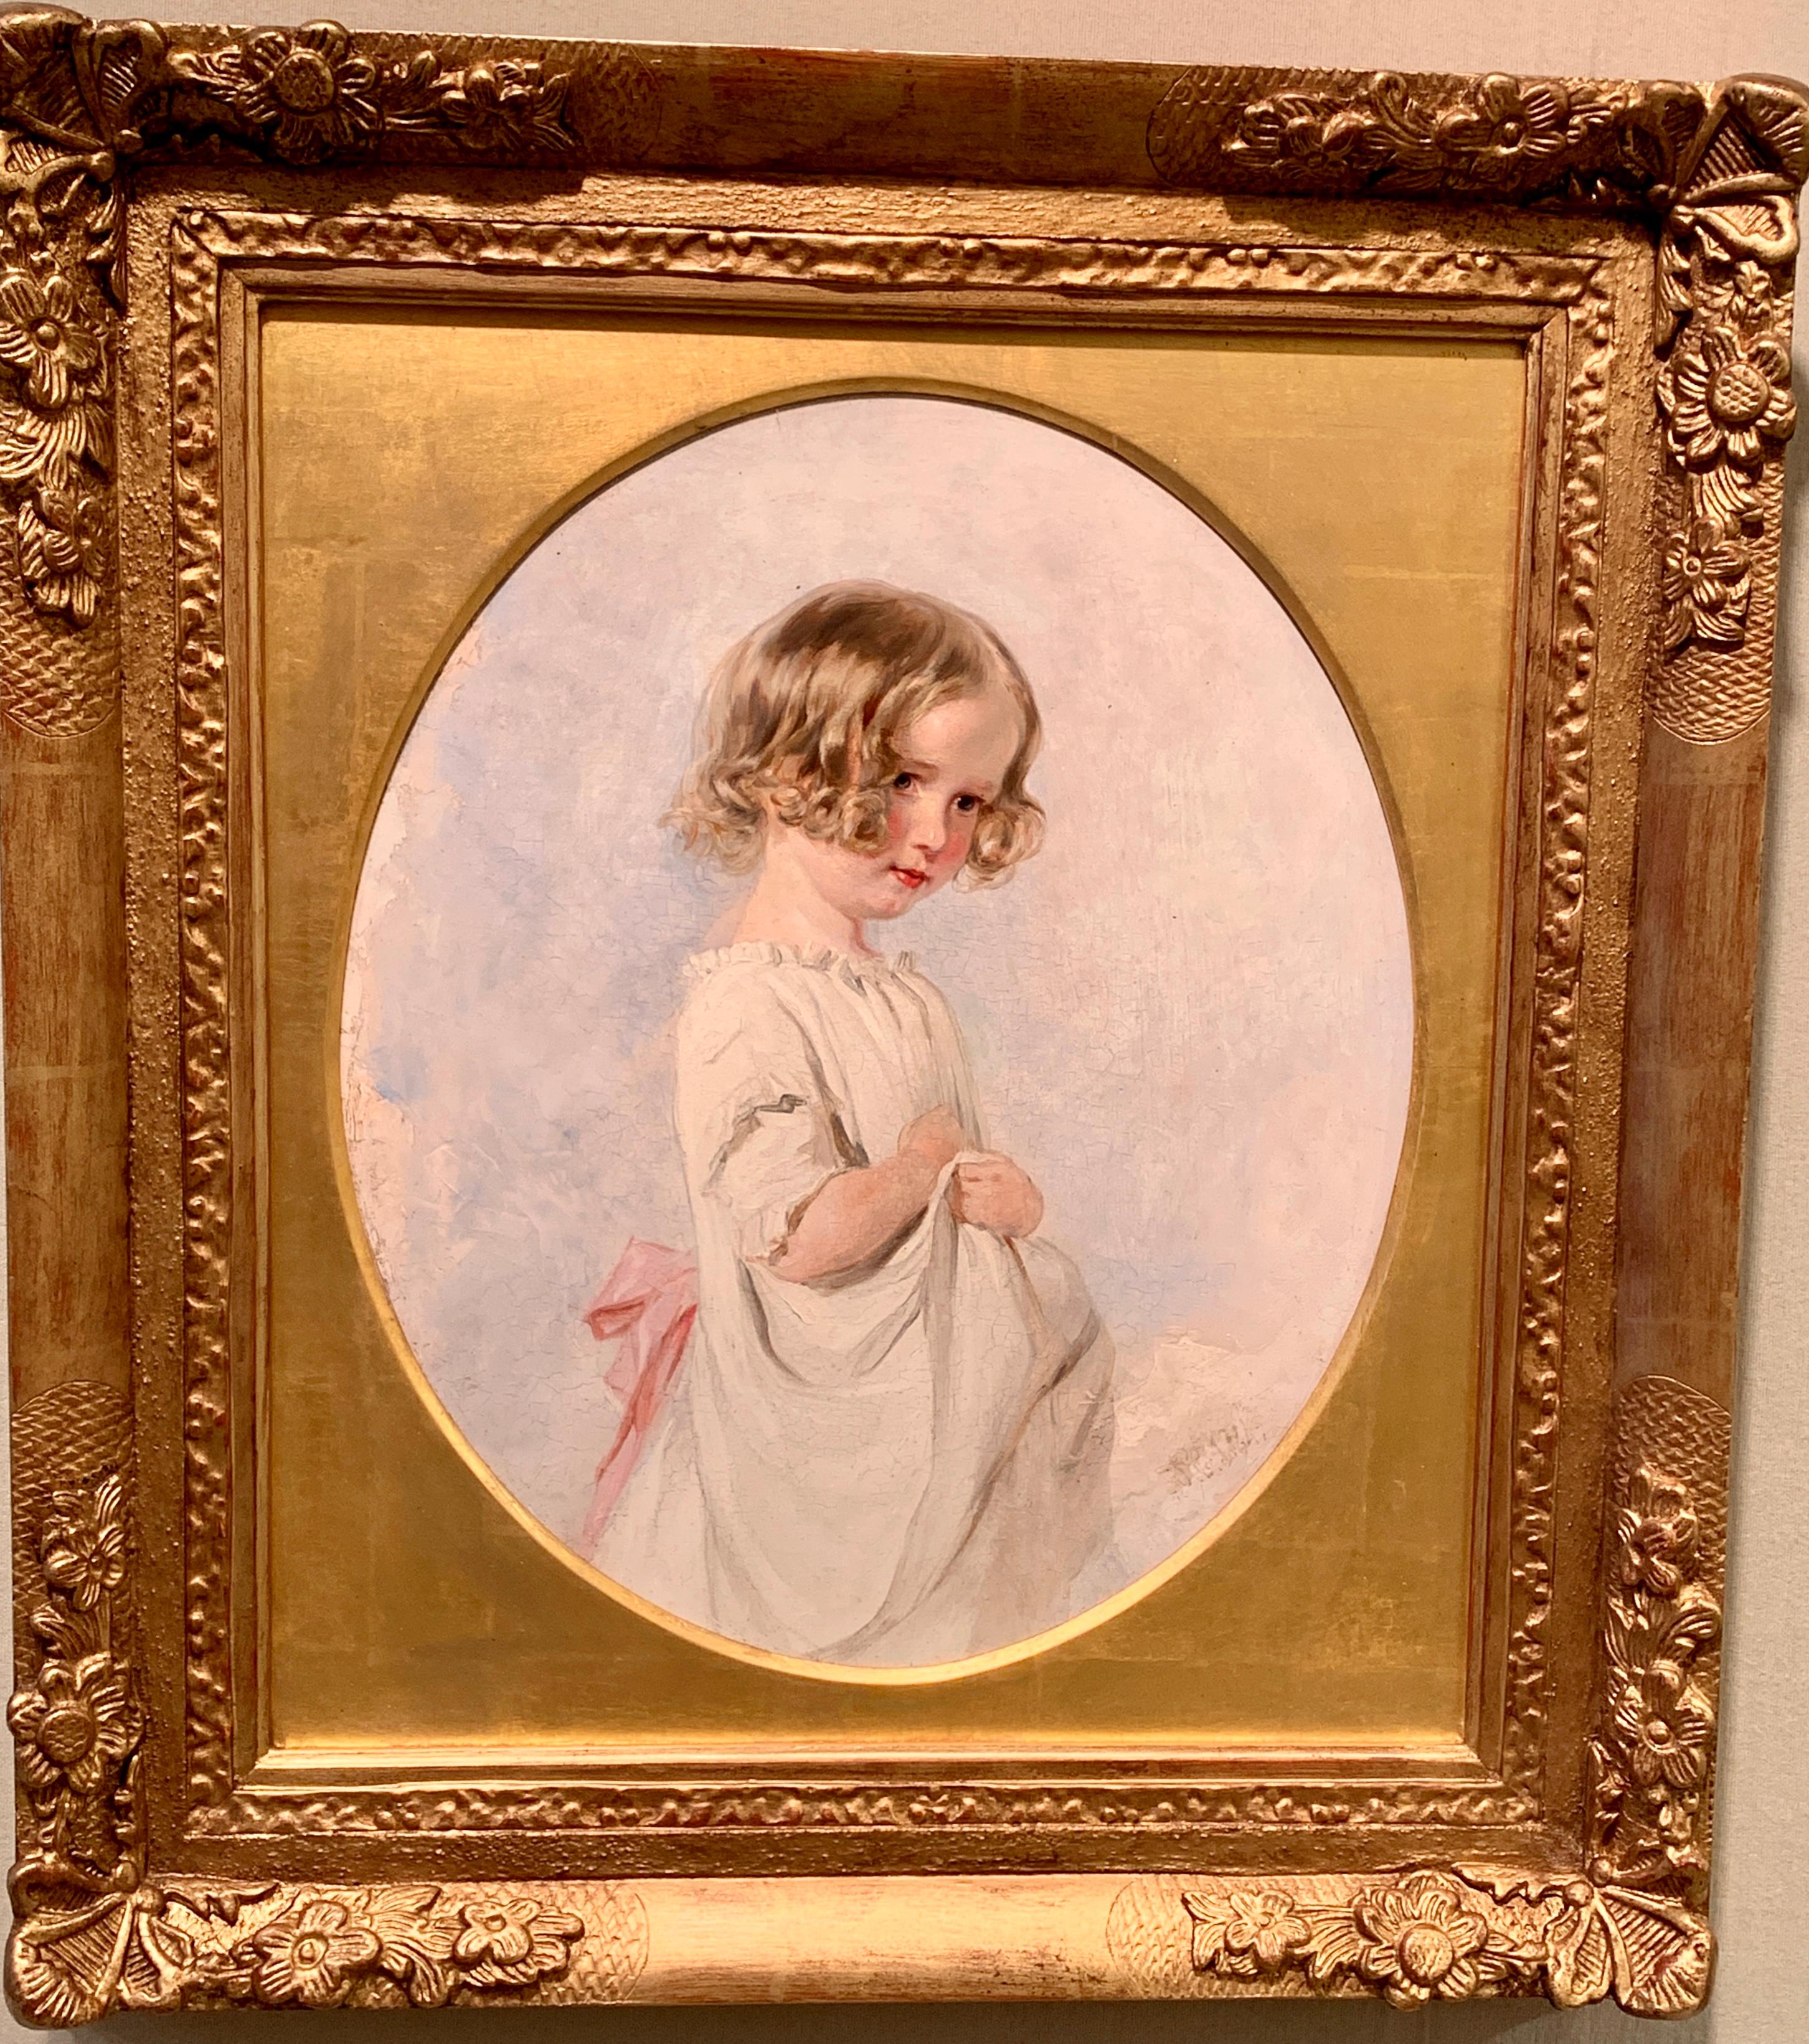 Antique 19th century English Victorian portrait of a blond haired young girl